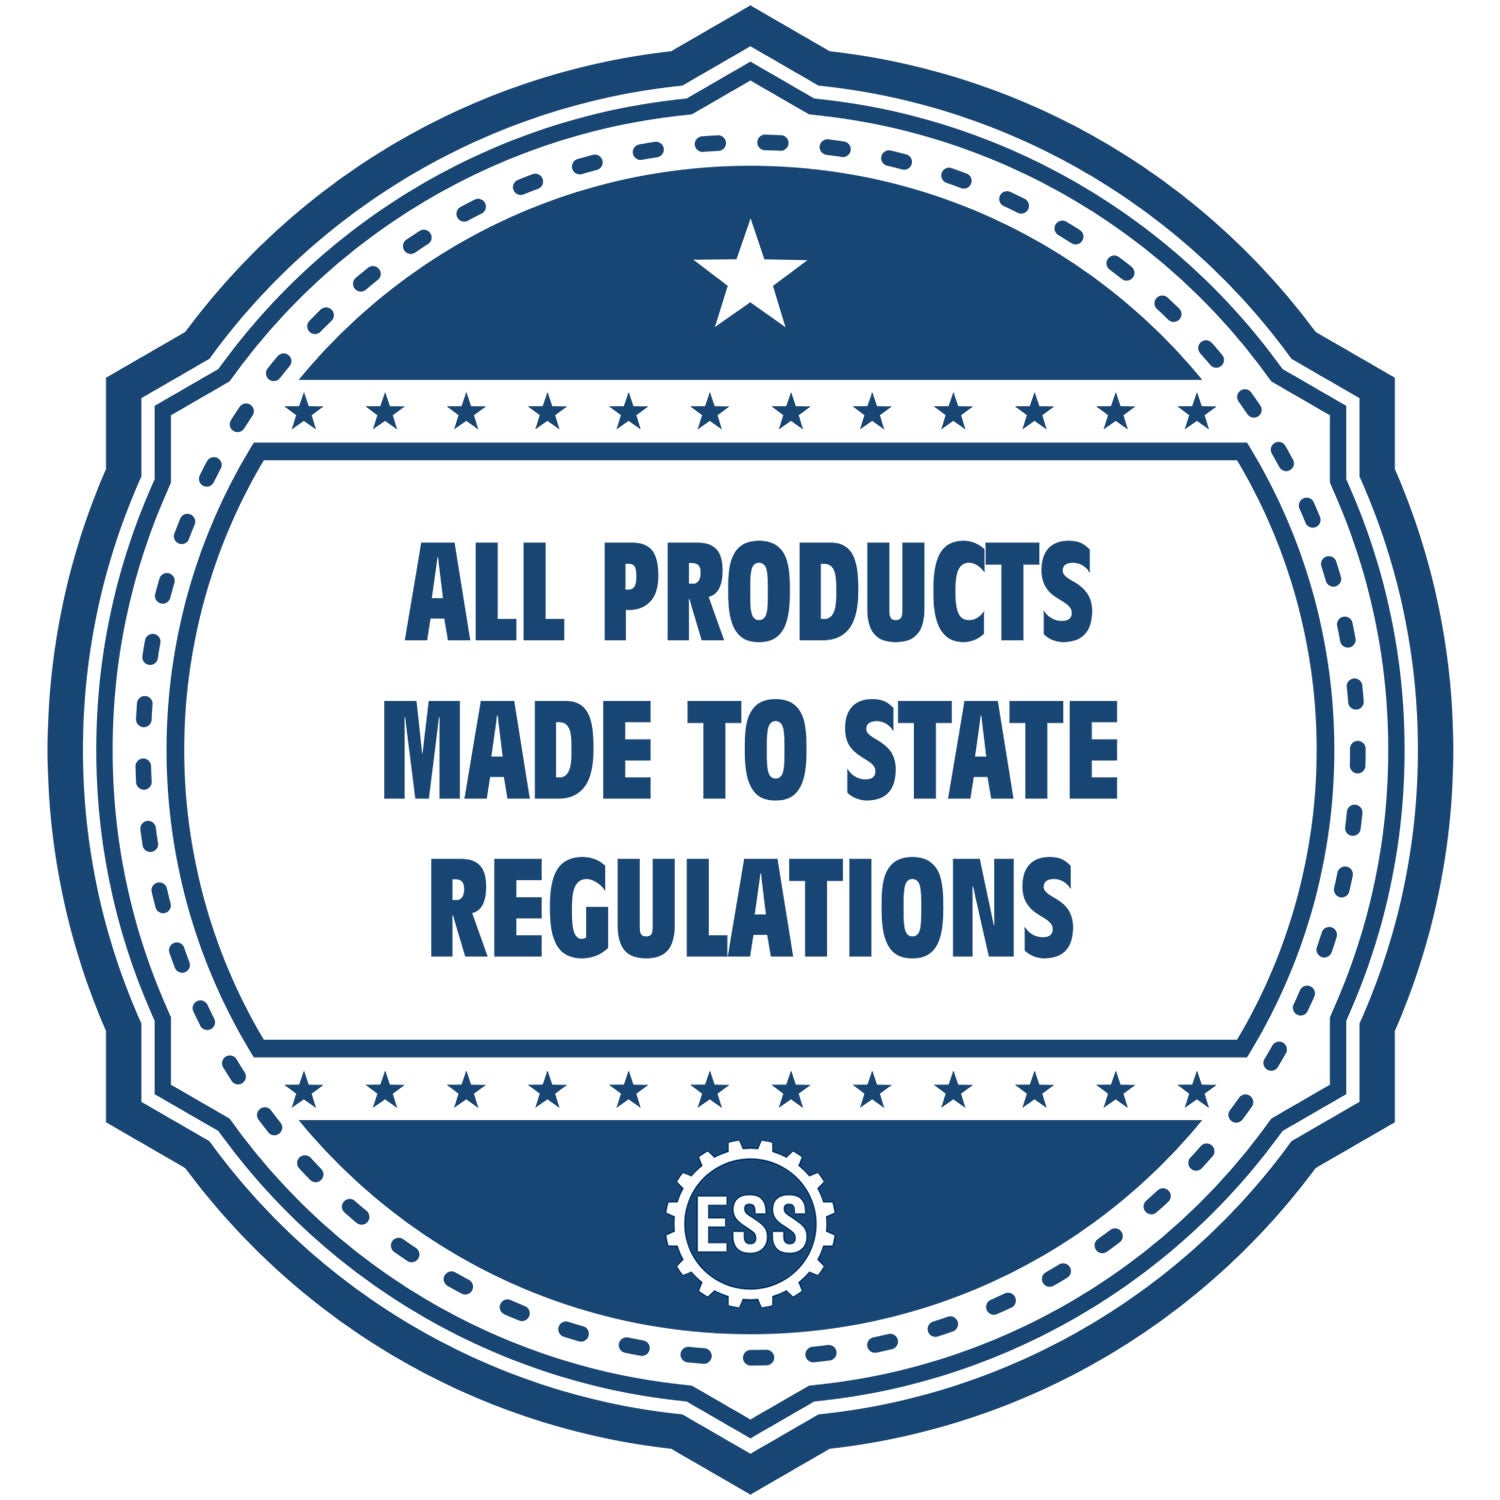 An icon or badge element for the Slim Pre-Inked State Seal Notary Stamp for South Carolina showing that this product is made in compliance with state regulations.